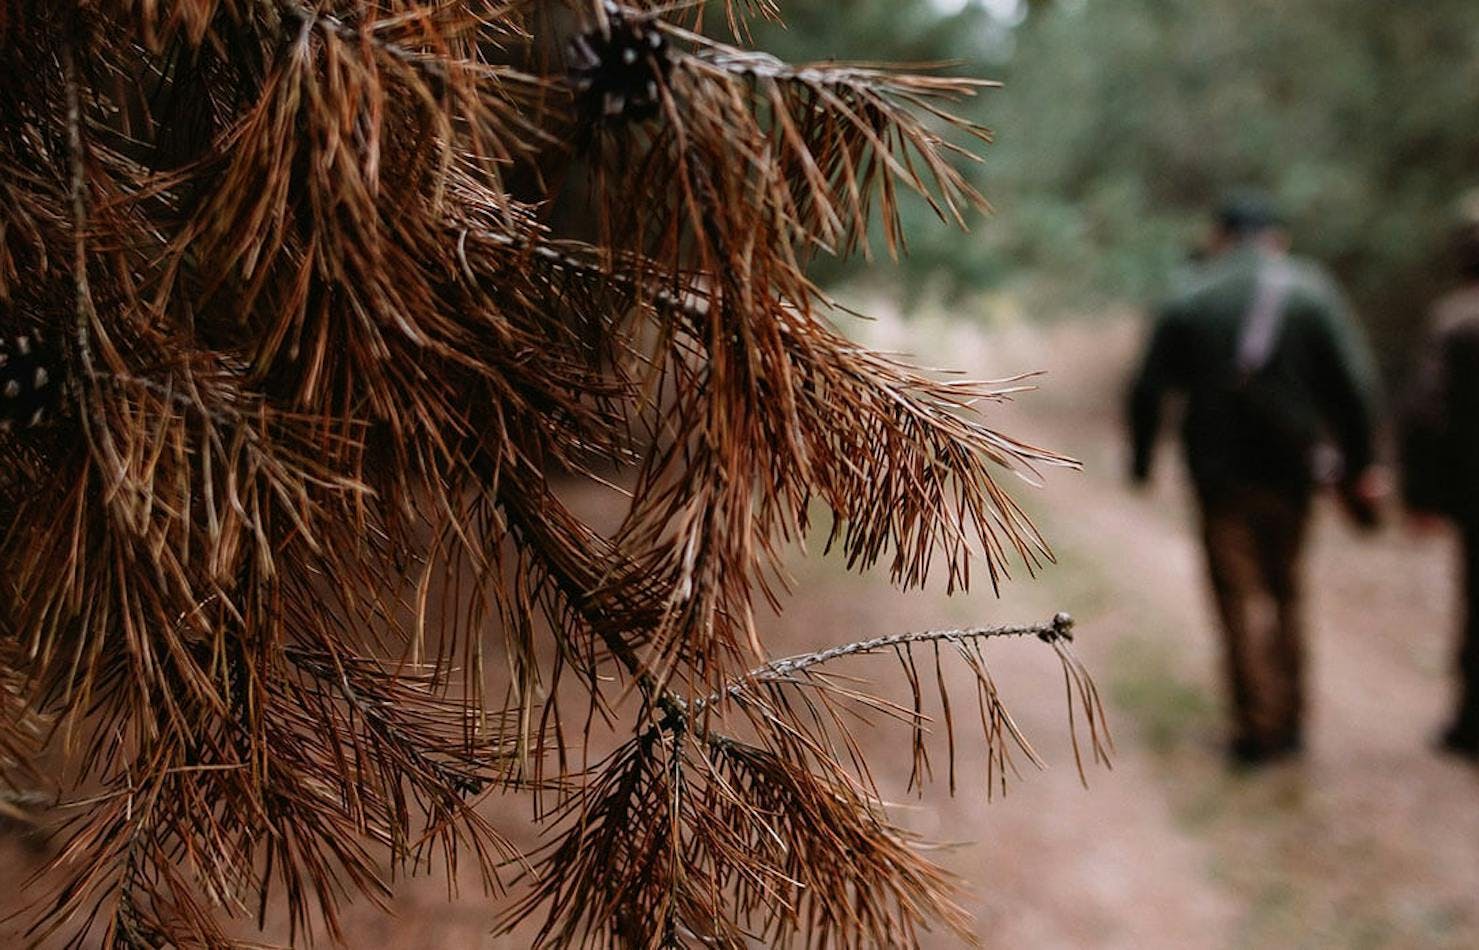 A close up of a tree with two people walking away in the background